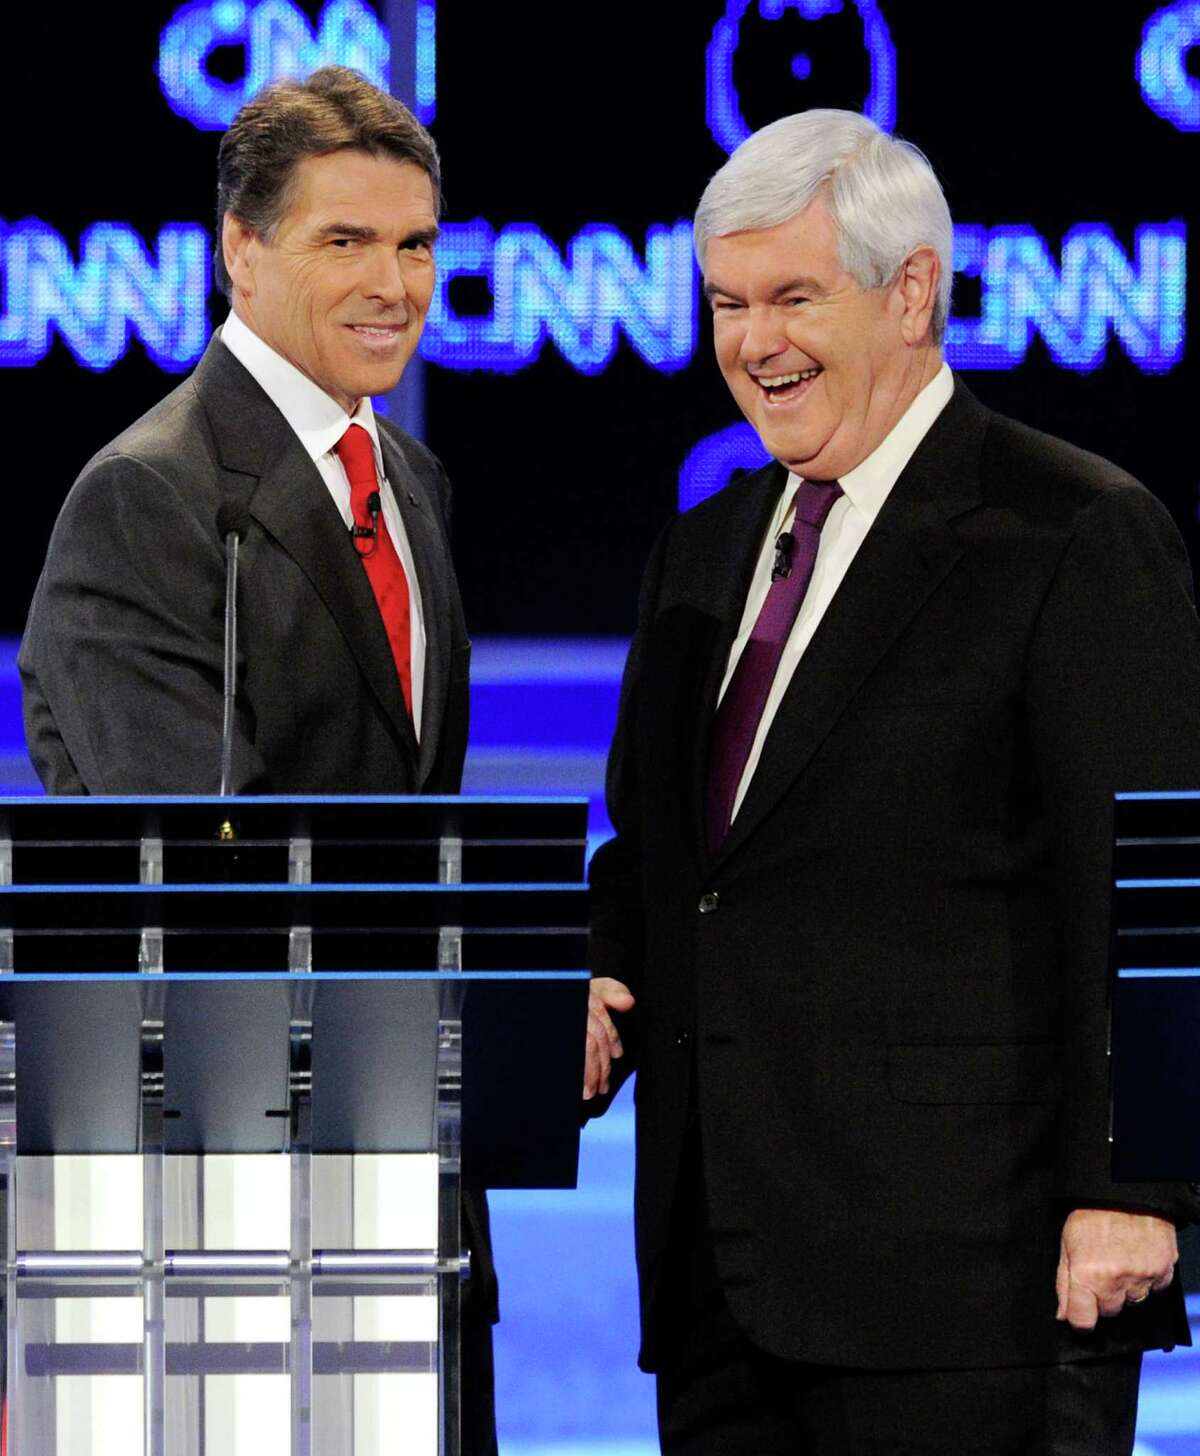 Rick Perry and former Speaker of the House Newt Gingrich shake hands after the Republican presidential debate airing on CNN, October 18, 2011 in Las Vegas.